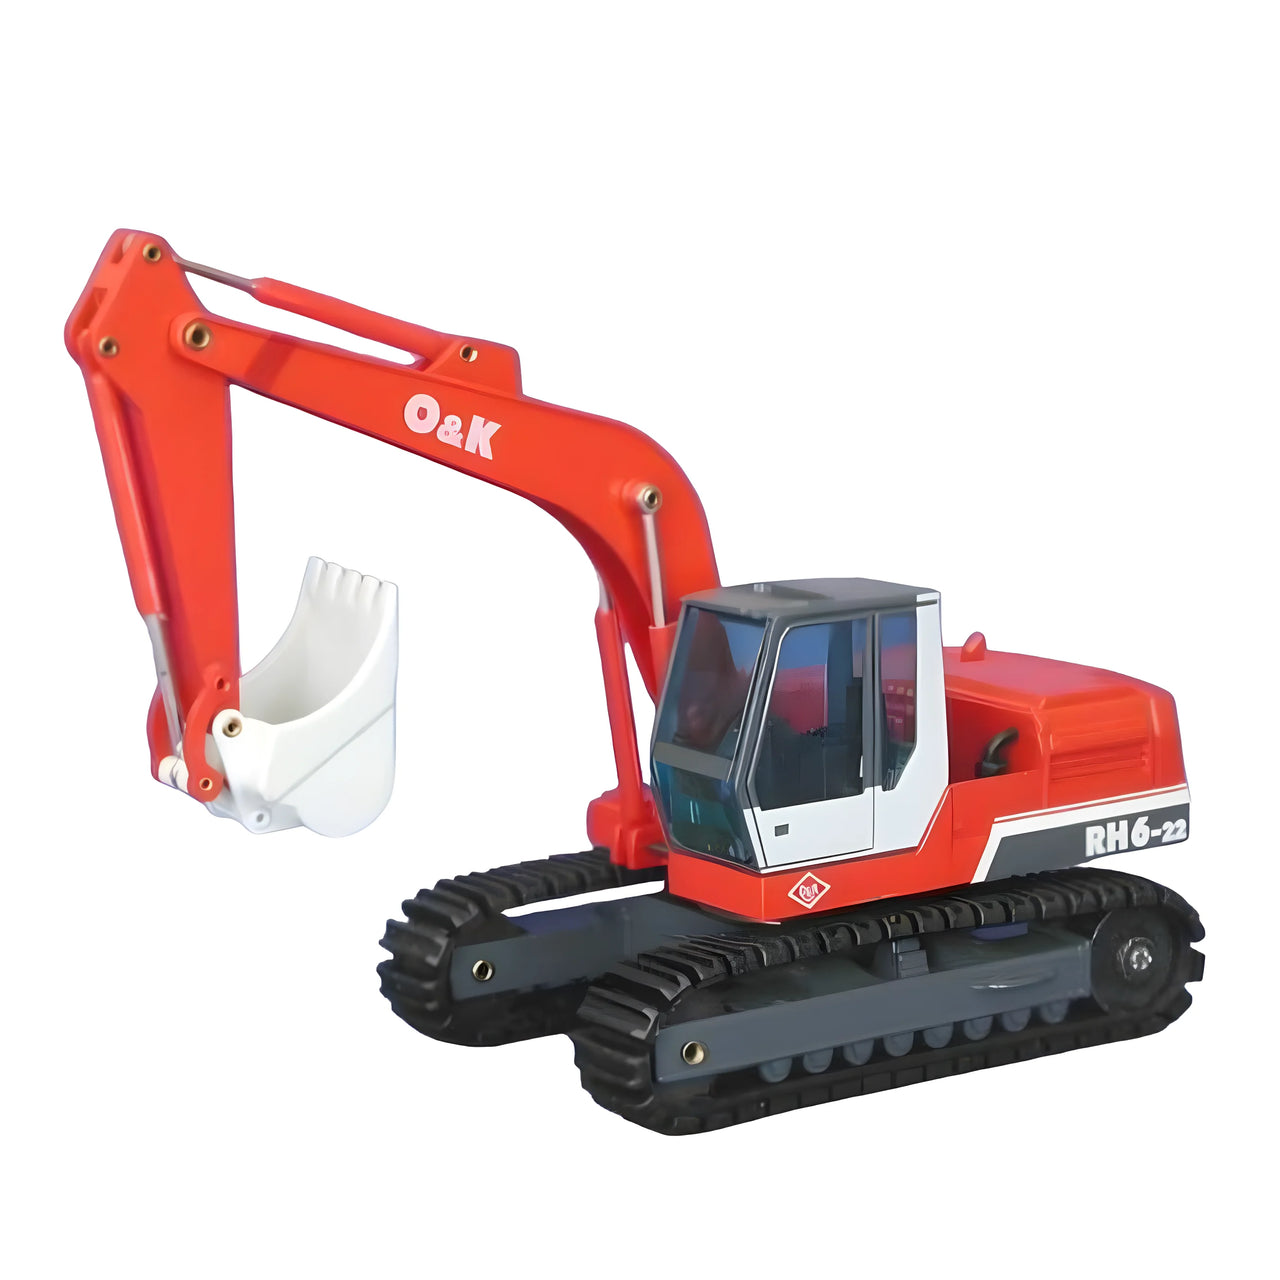 334-2 O&amp;K RH6-22 Tracked Excavator 1:50 Scale (Discontinued Model)